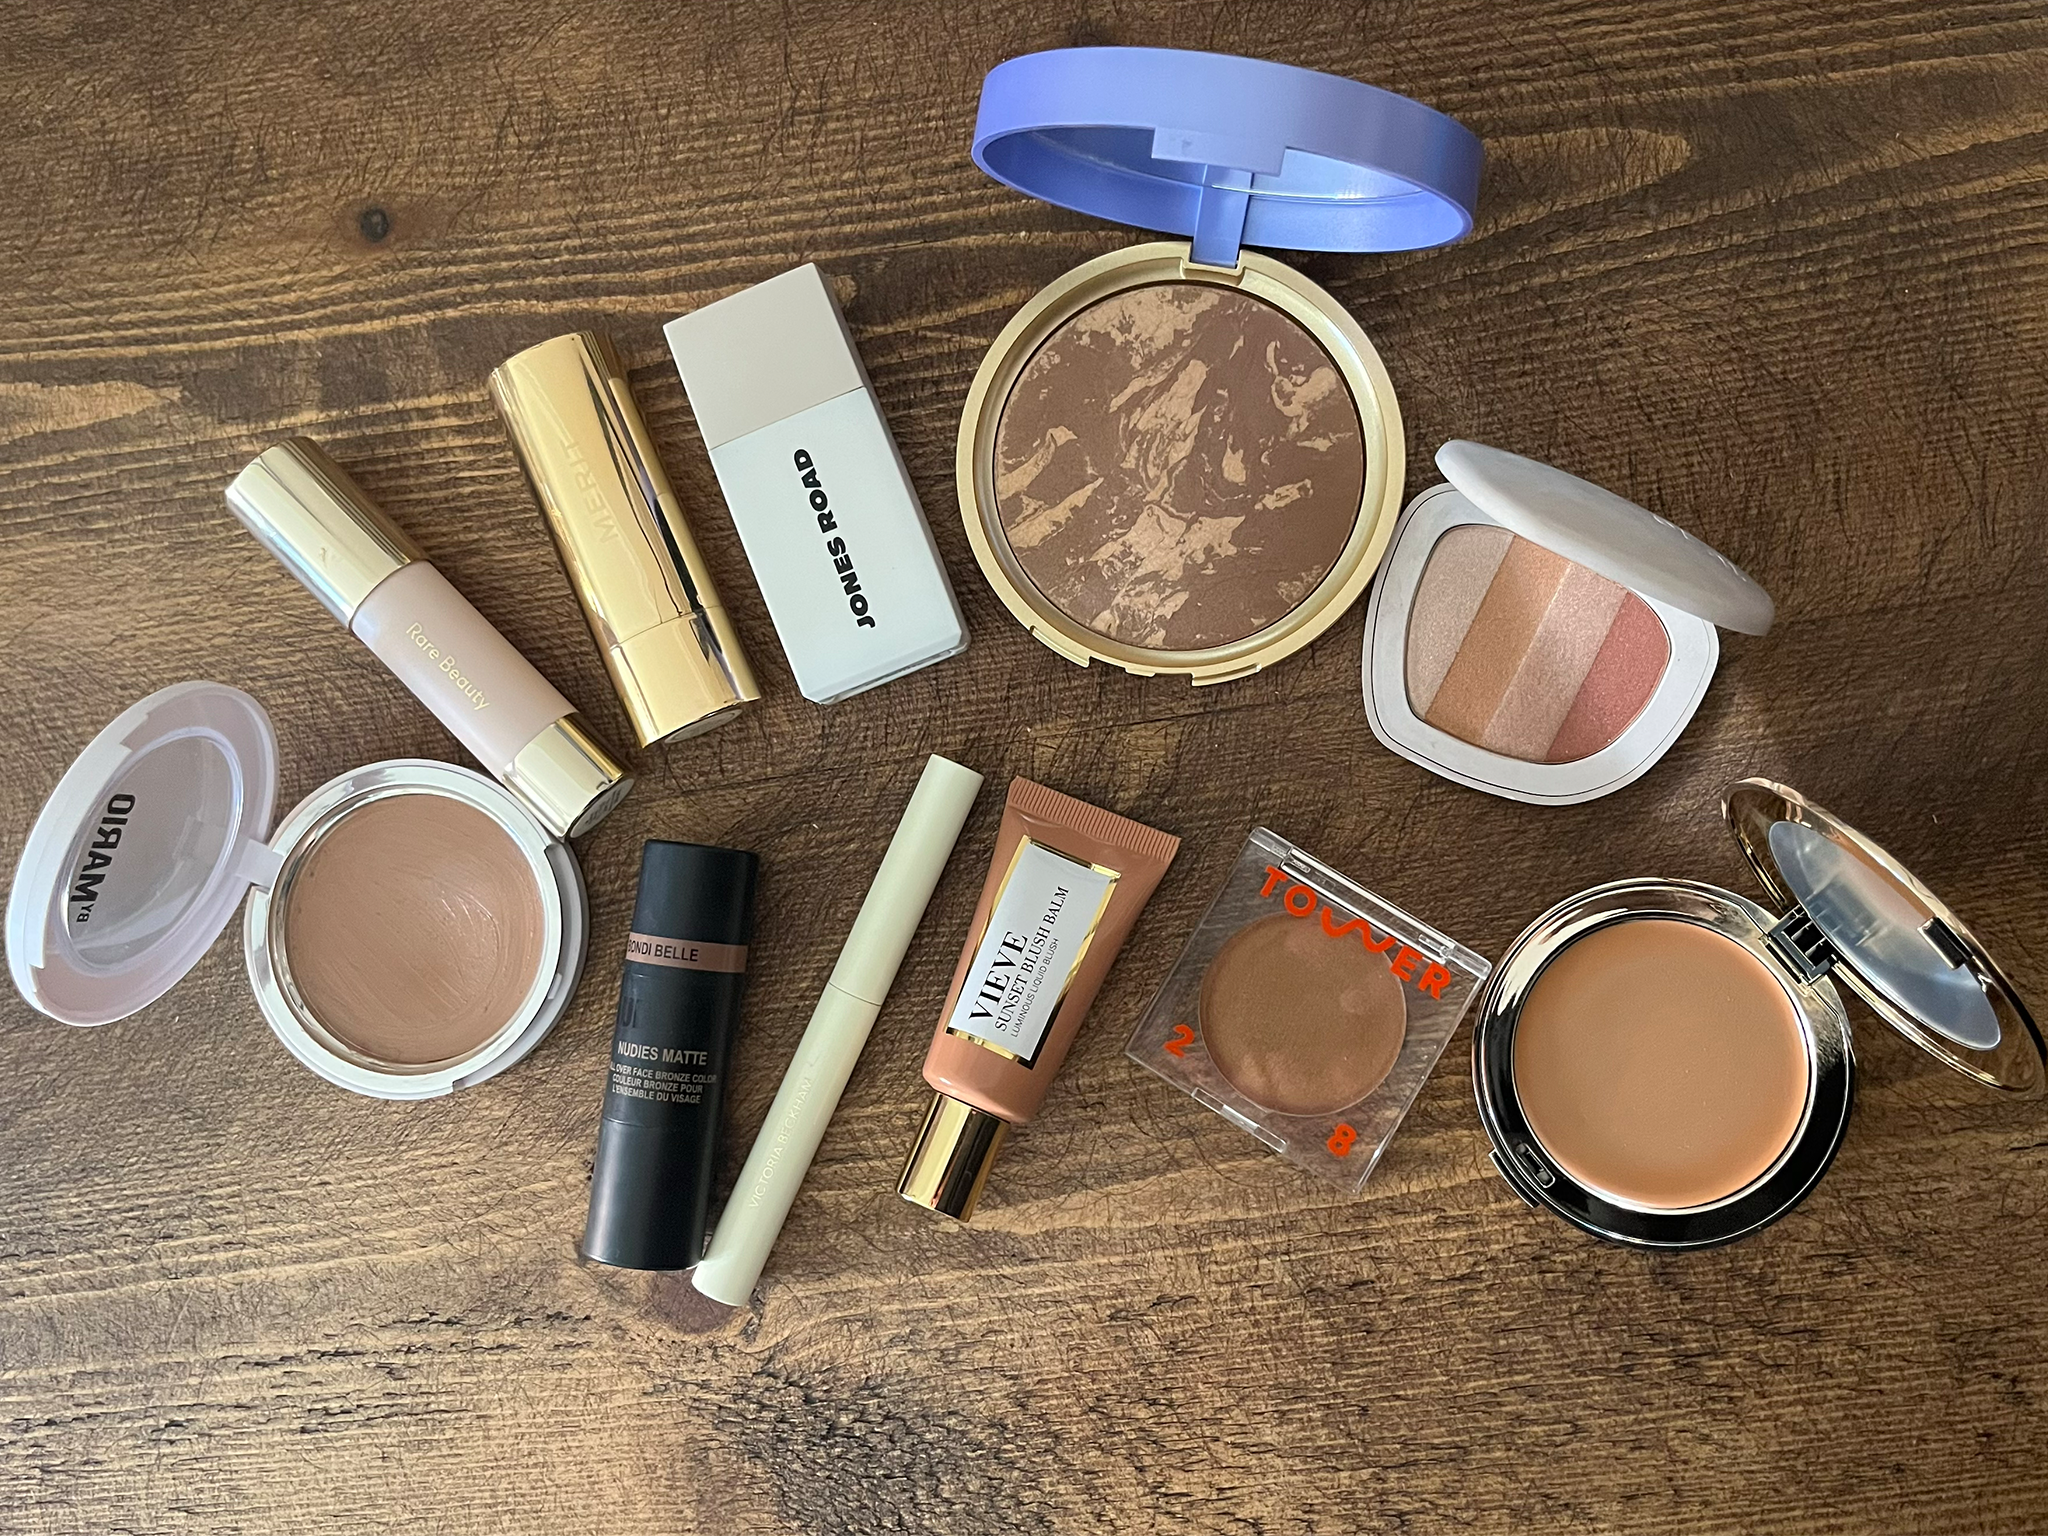 We tested affordable through to high-end bronzers over four weeks